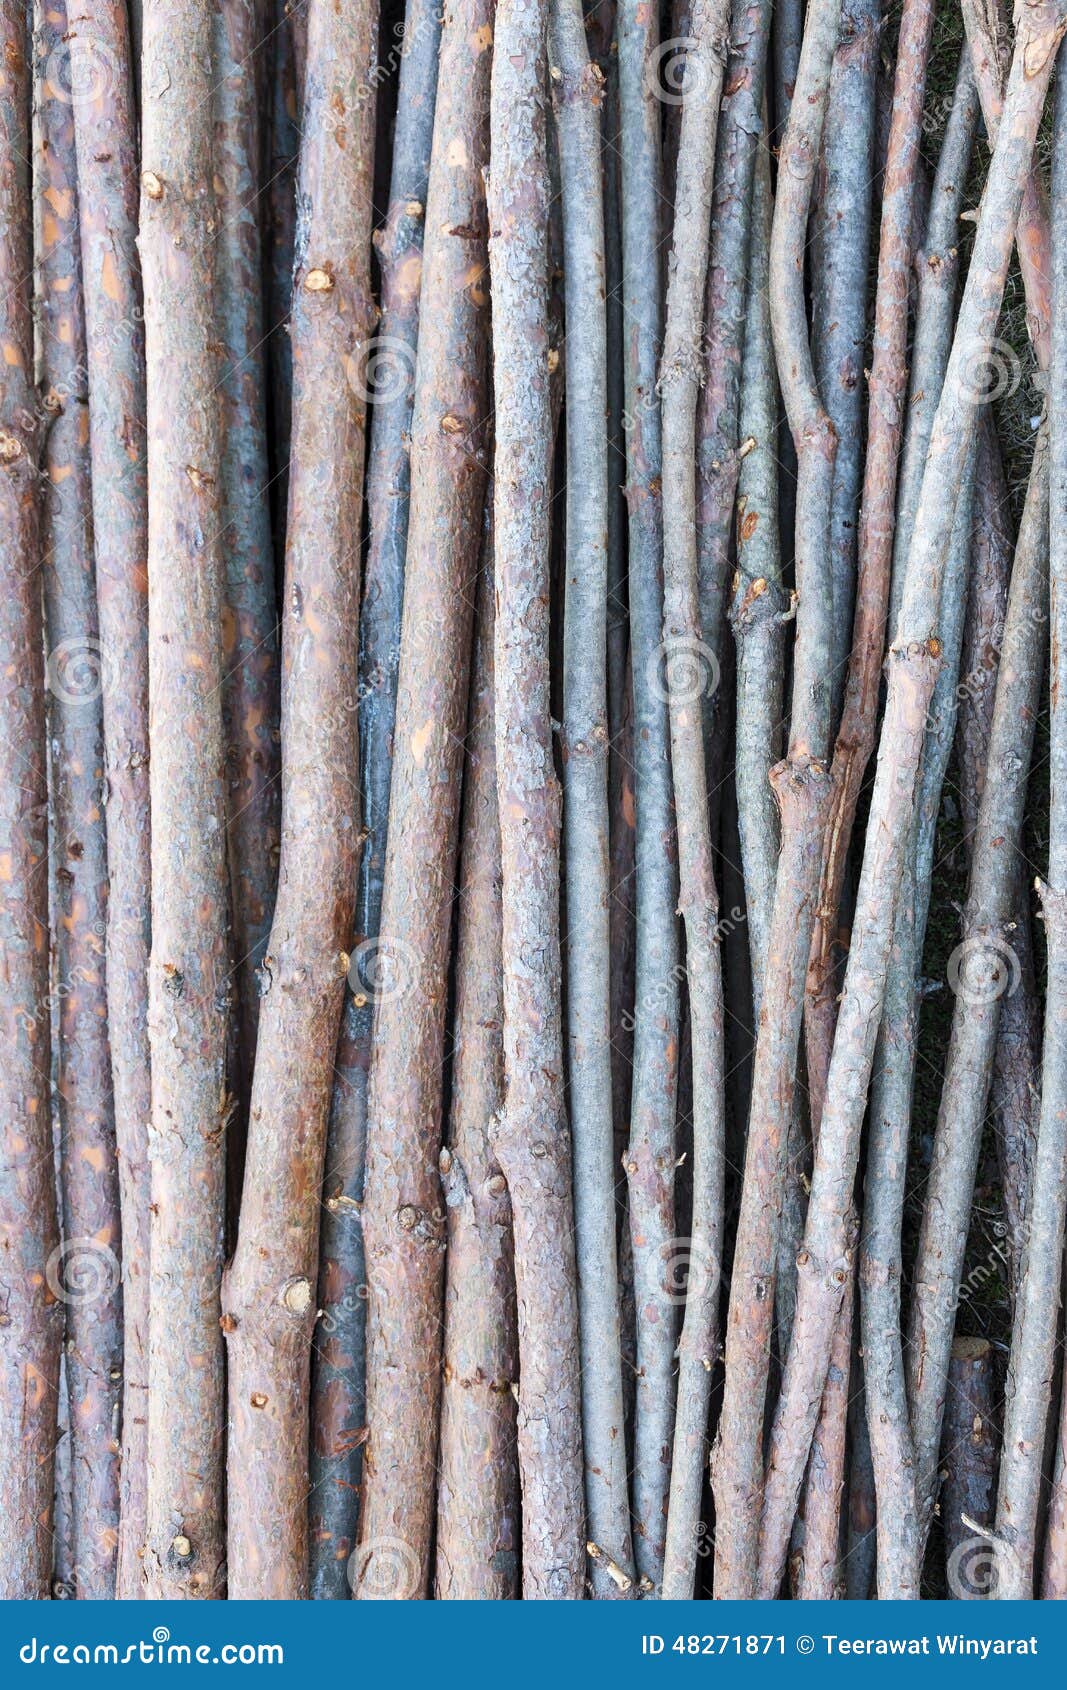 Wood Stick Images – Browse 447,307 Stock Photos, Vectors, and